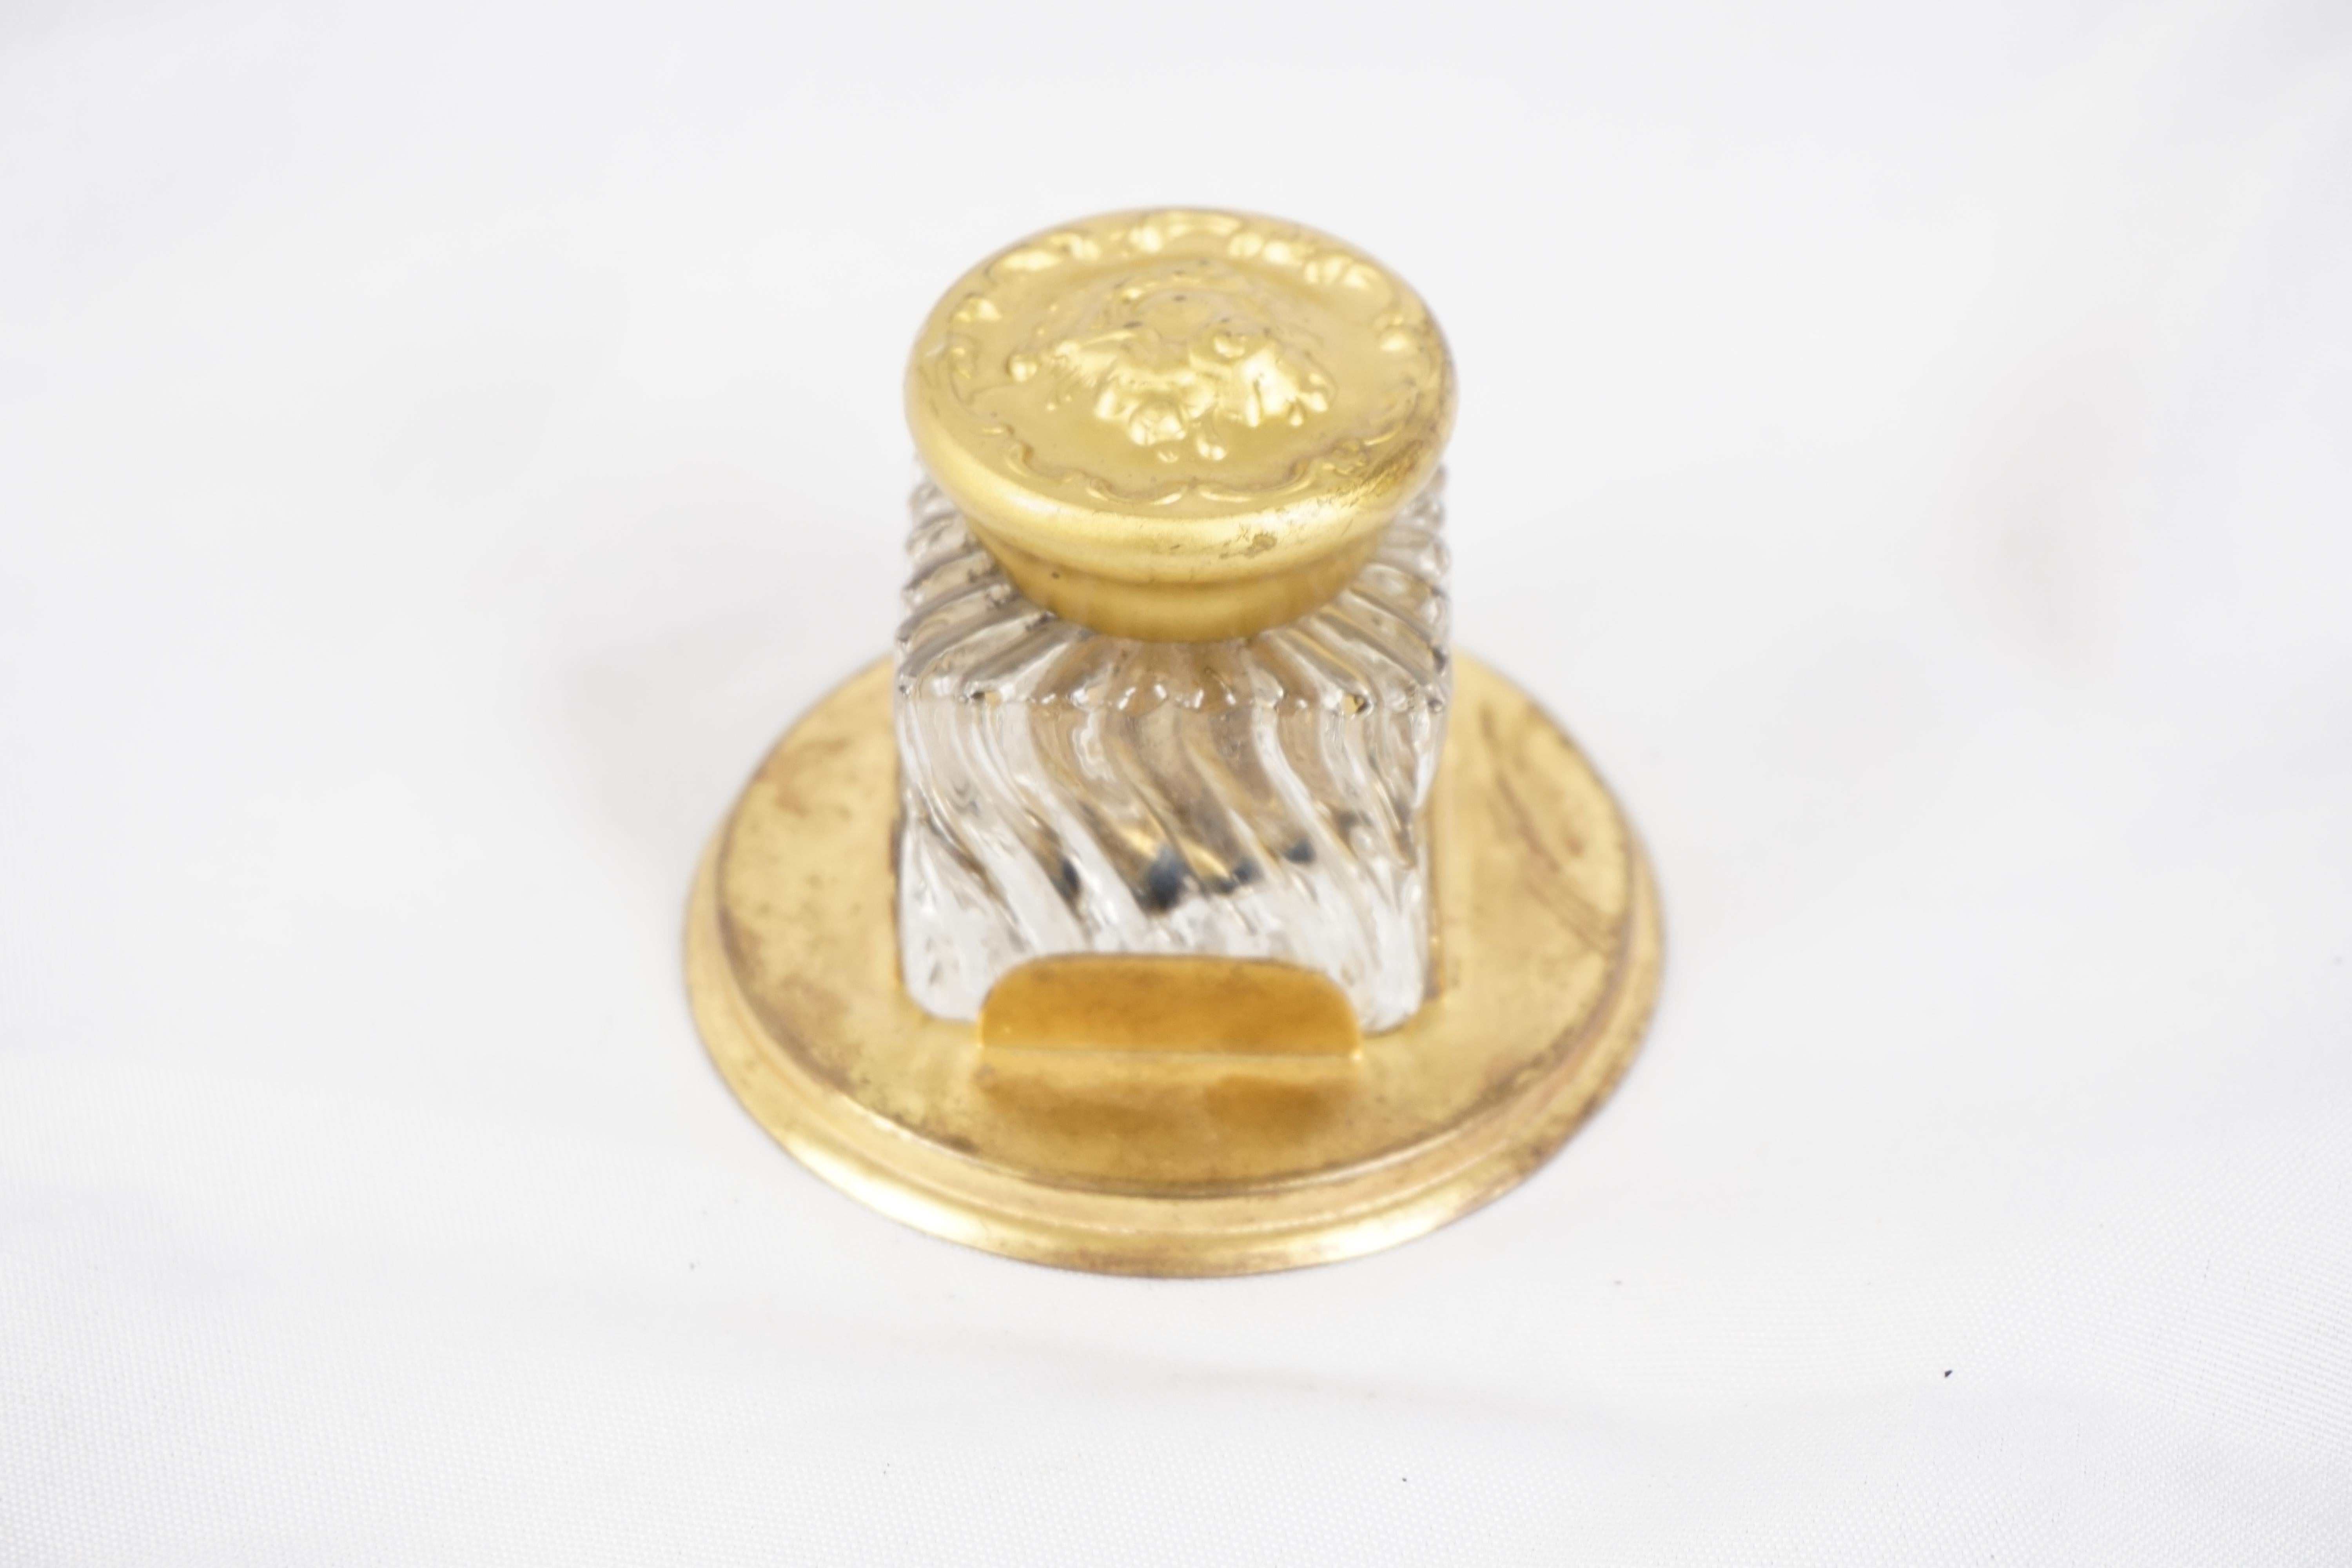 Vintage Brass Inkwell, Single Inkstand, England 1930, H305

England 1930
Single Inkwell With Brass Fitting And Cover
Sitting In A Brass Base 

H305

Measures: 3